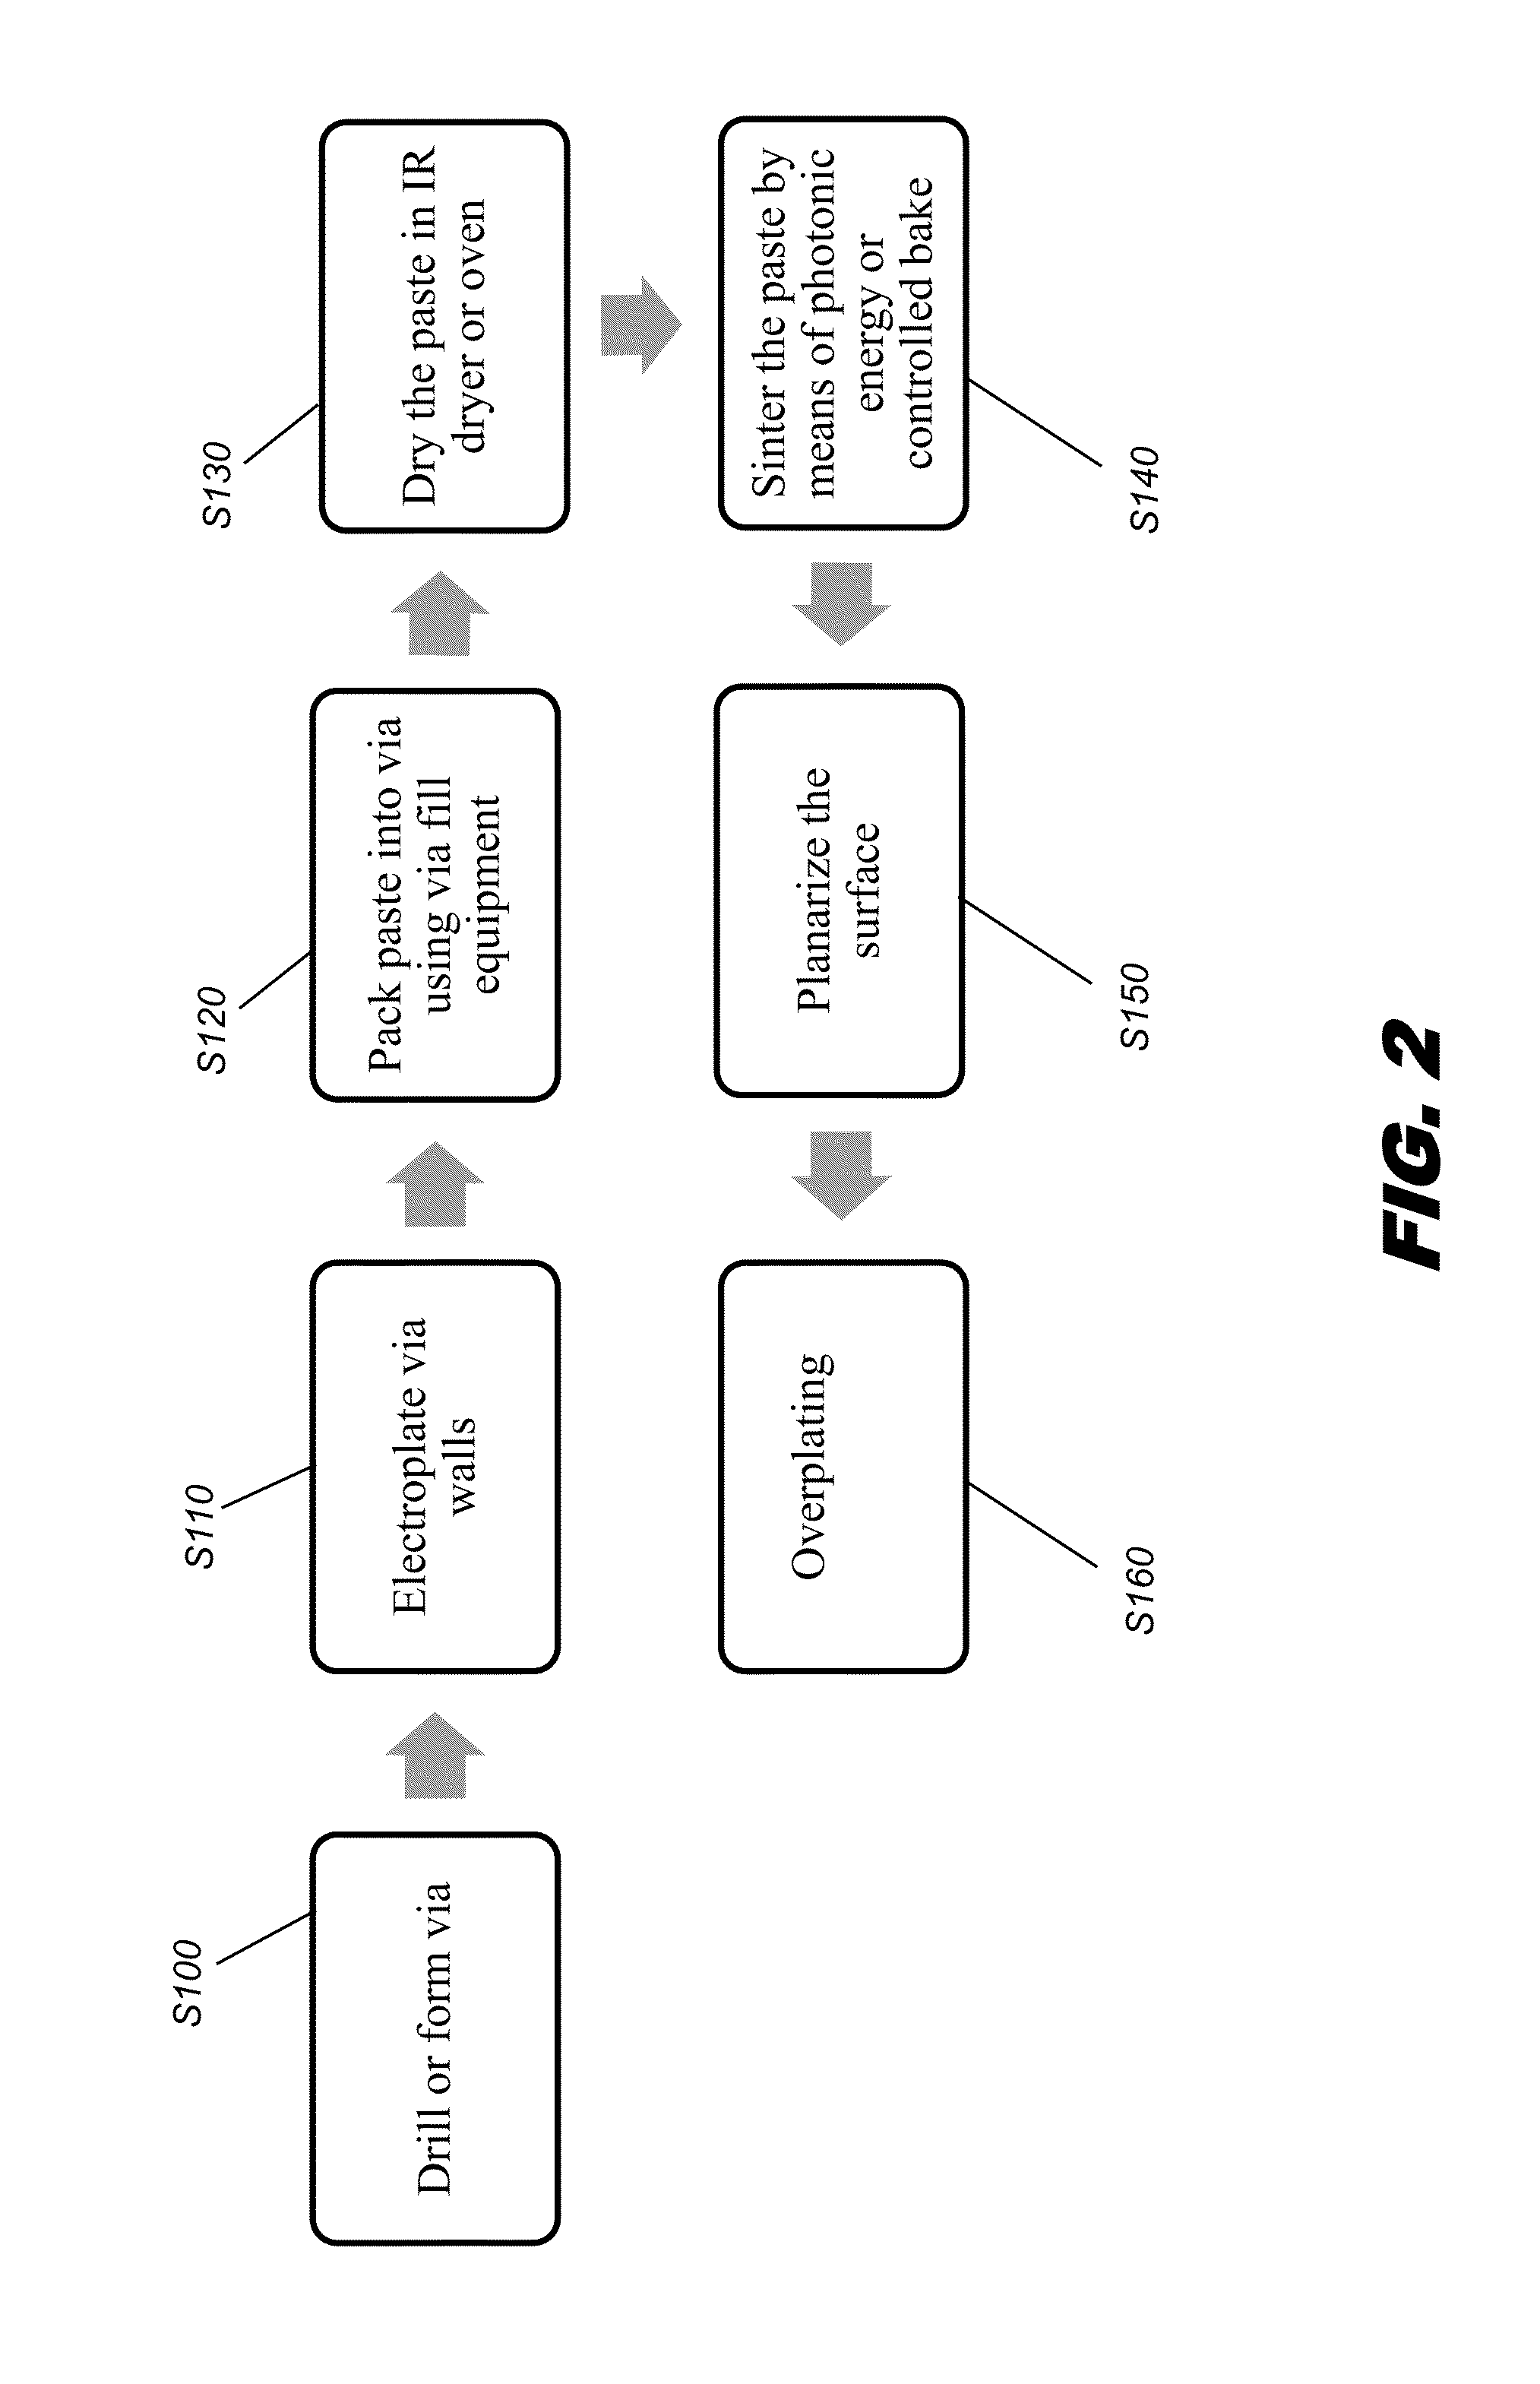 Method for forming vias on printed circuit boards